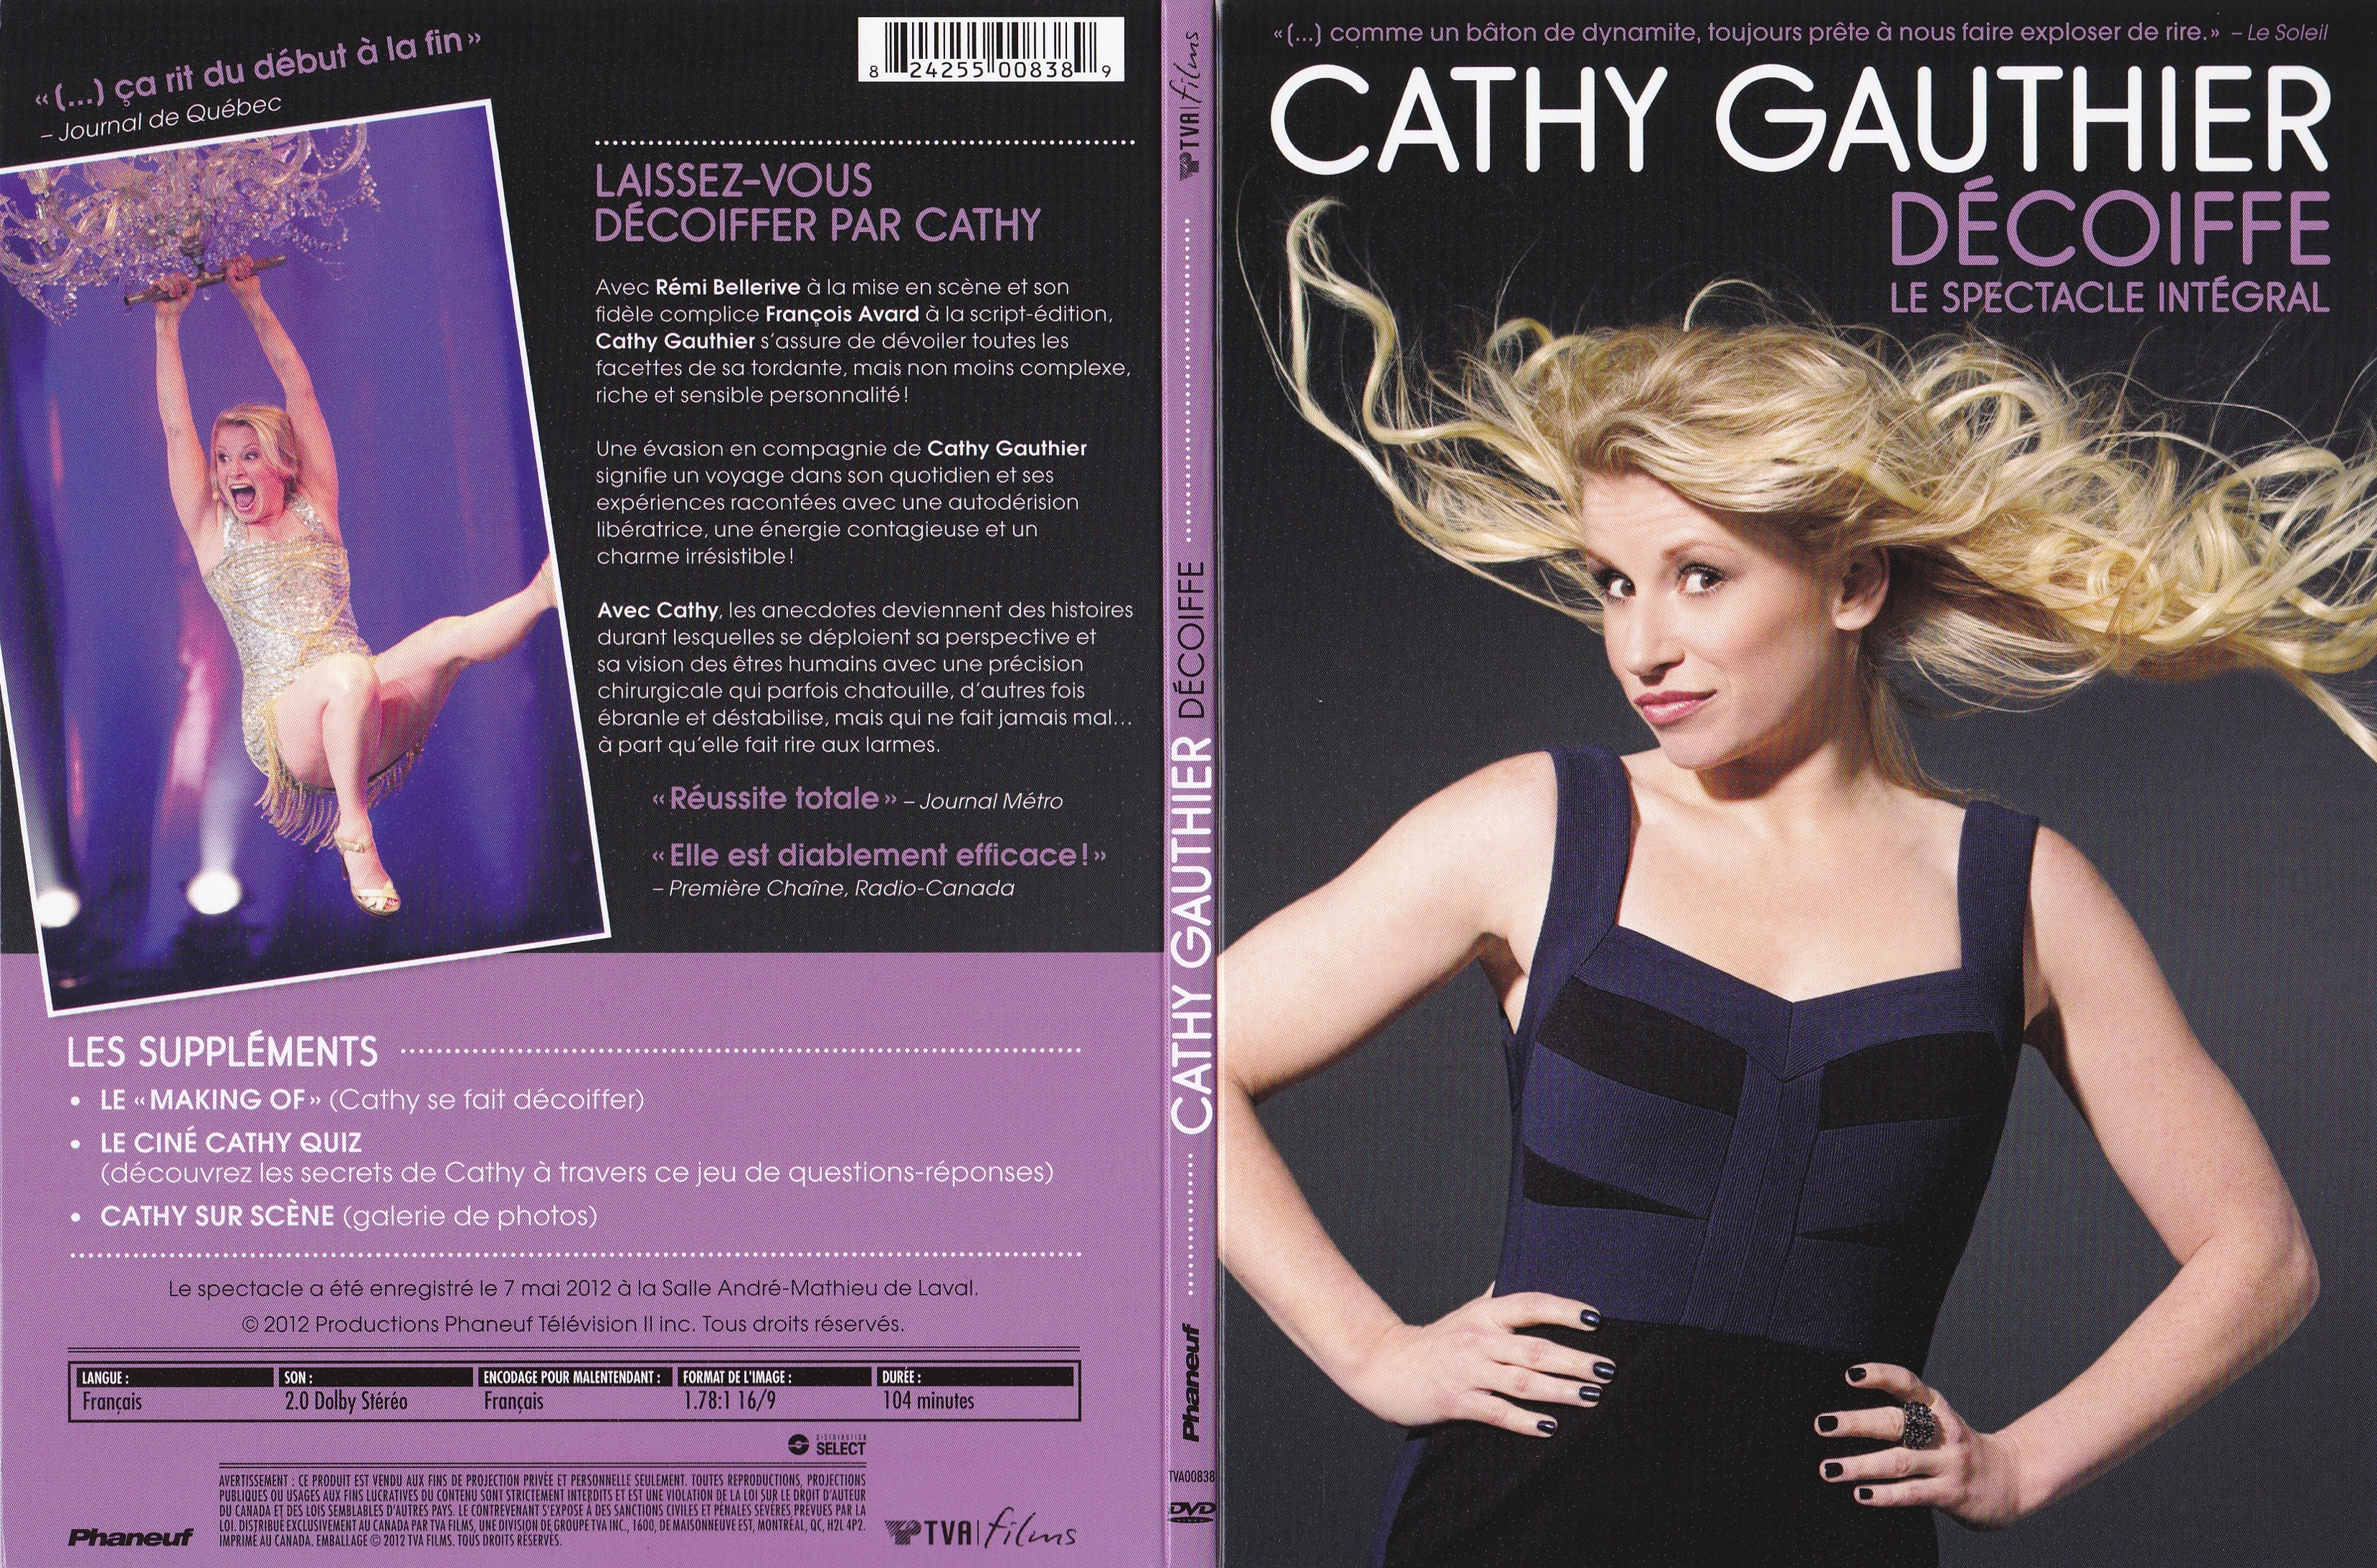 Jaquette DVD Cathy Gauthier - Dcoiffe (Canadienne)